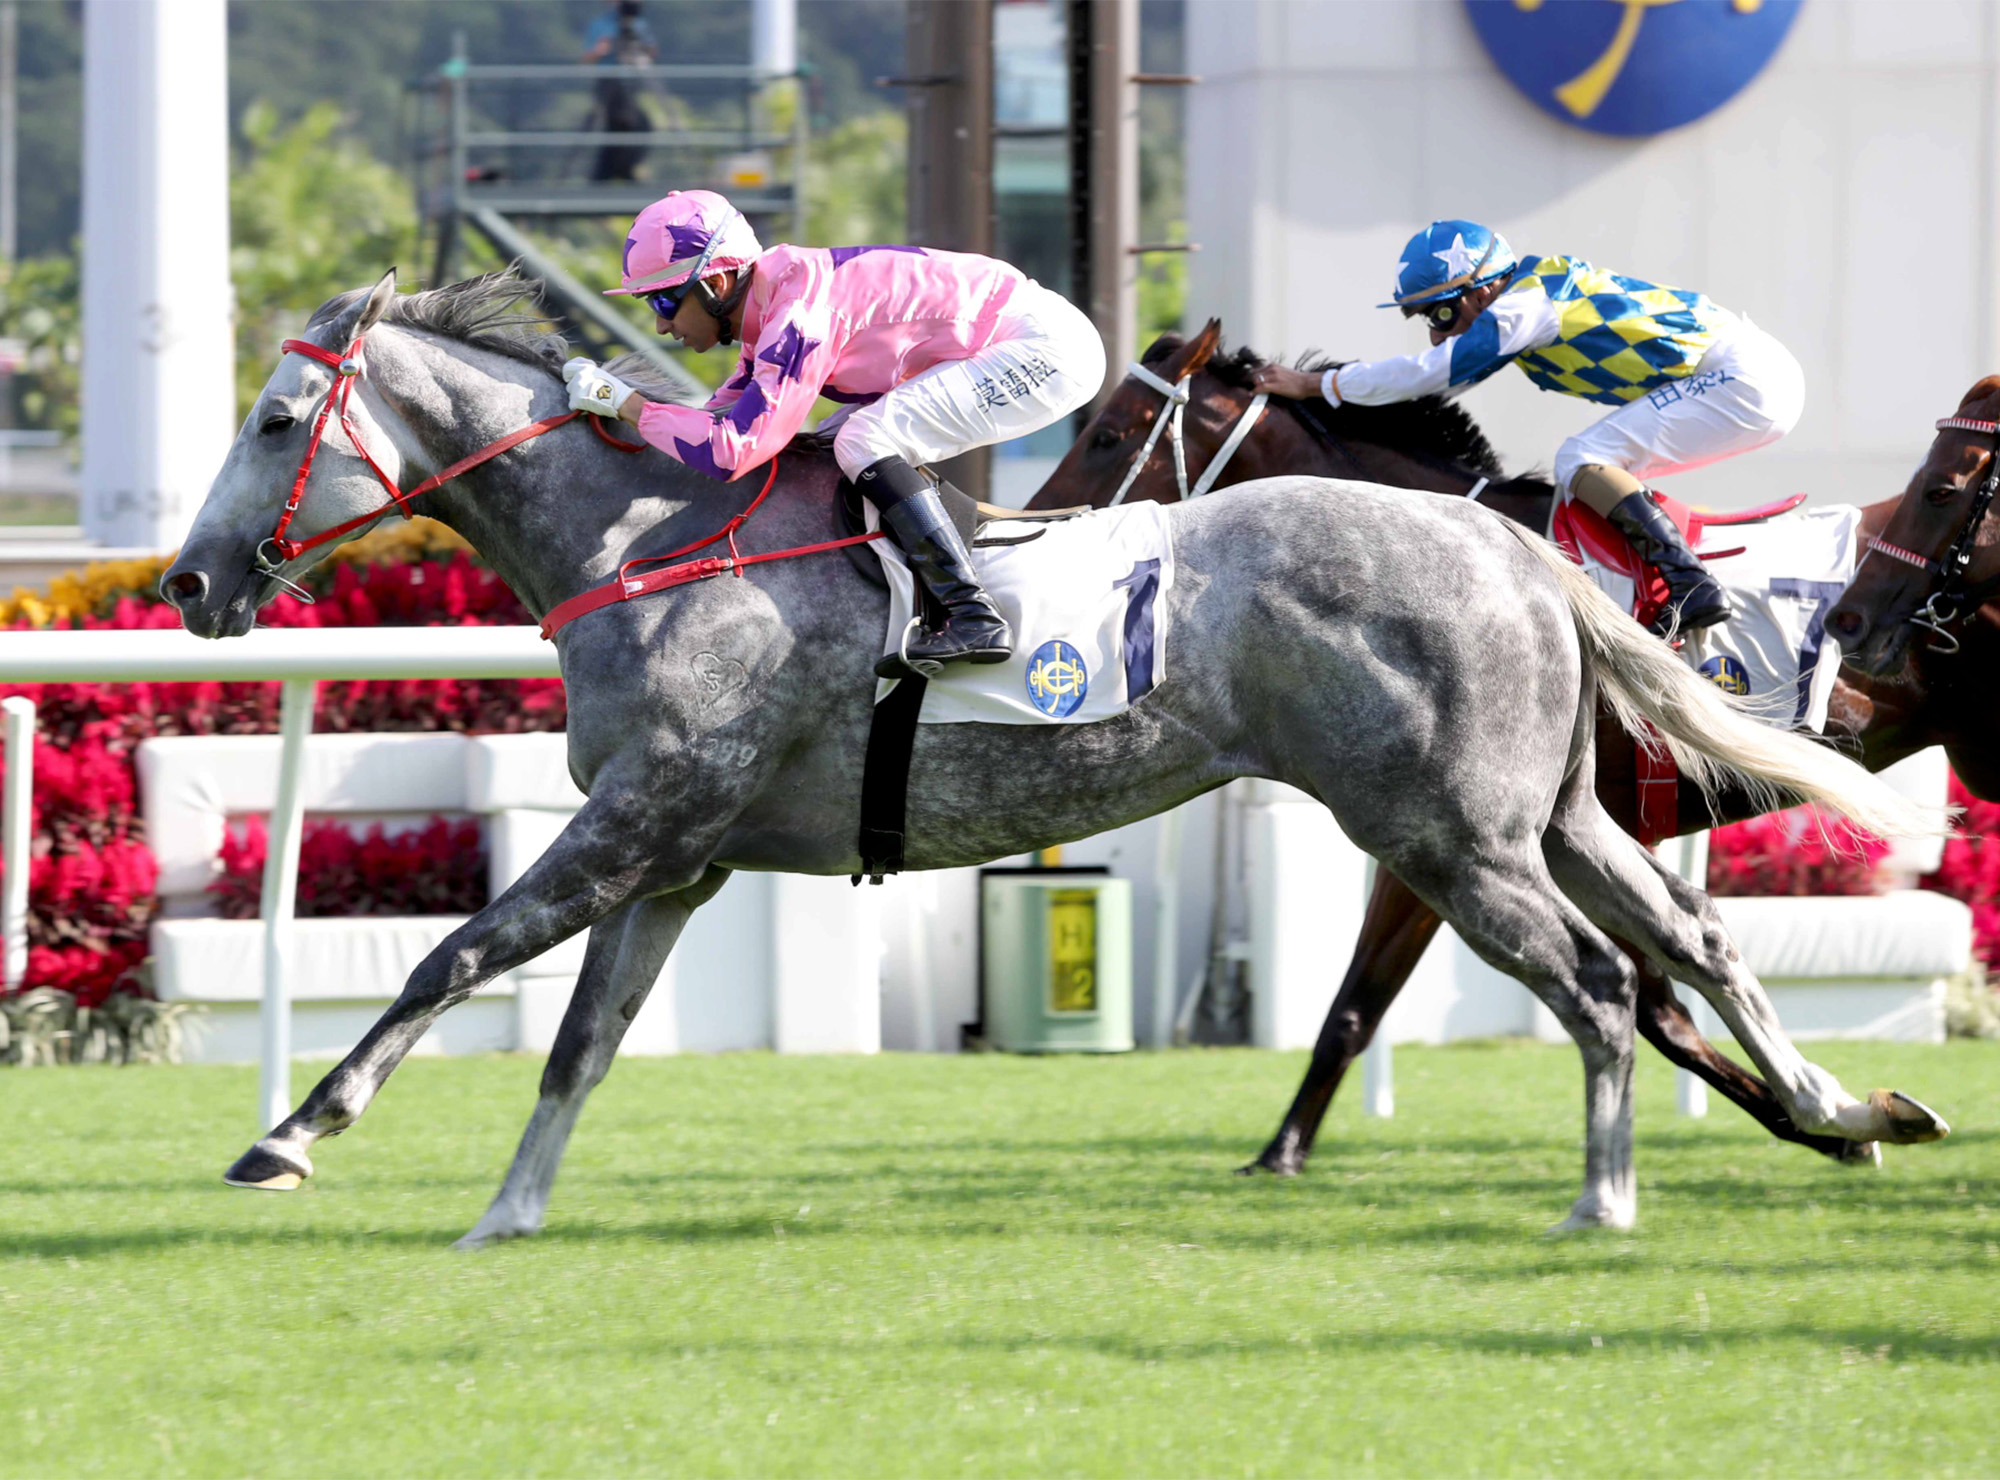 Hot King Prawn – HK : Dual G2 Jockey Club Sprint winner who has placed three times at G1 level, including a neck defeat in last year’s G1 LONGINES Hong Kong Sprint.